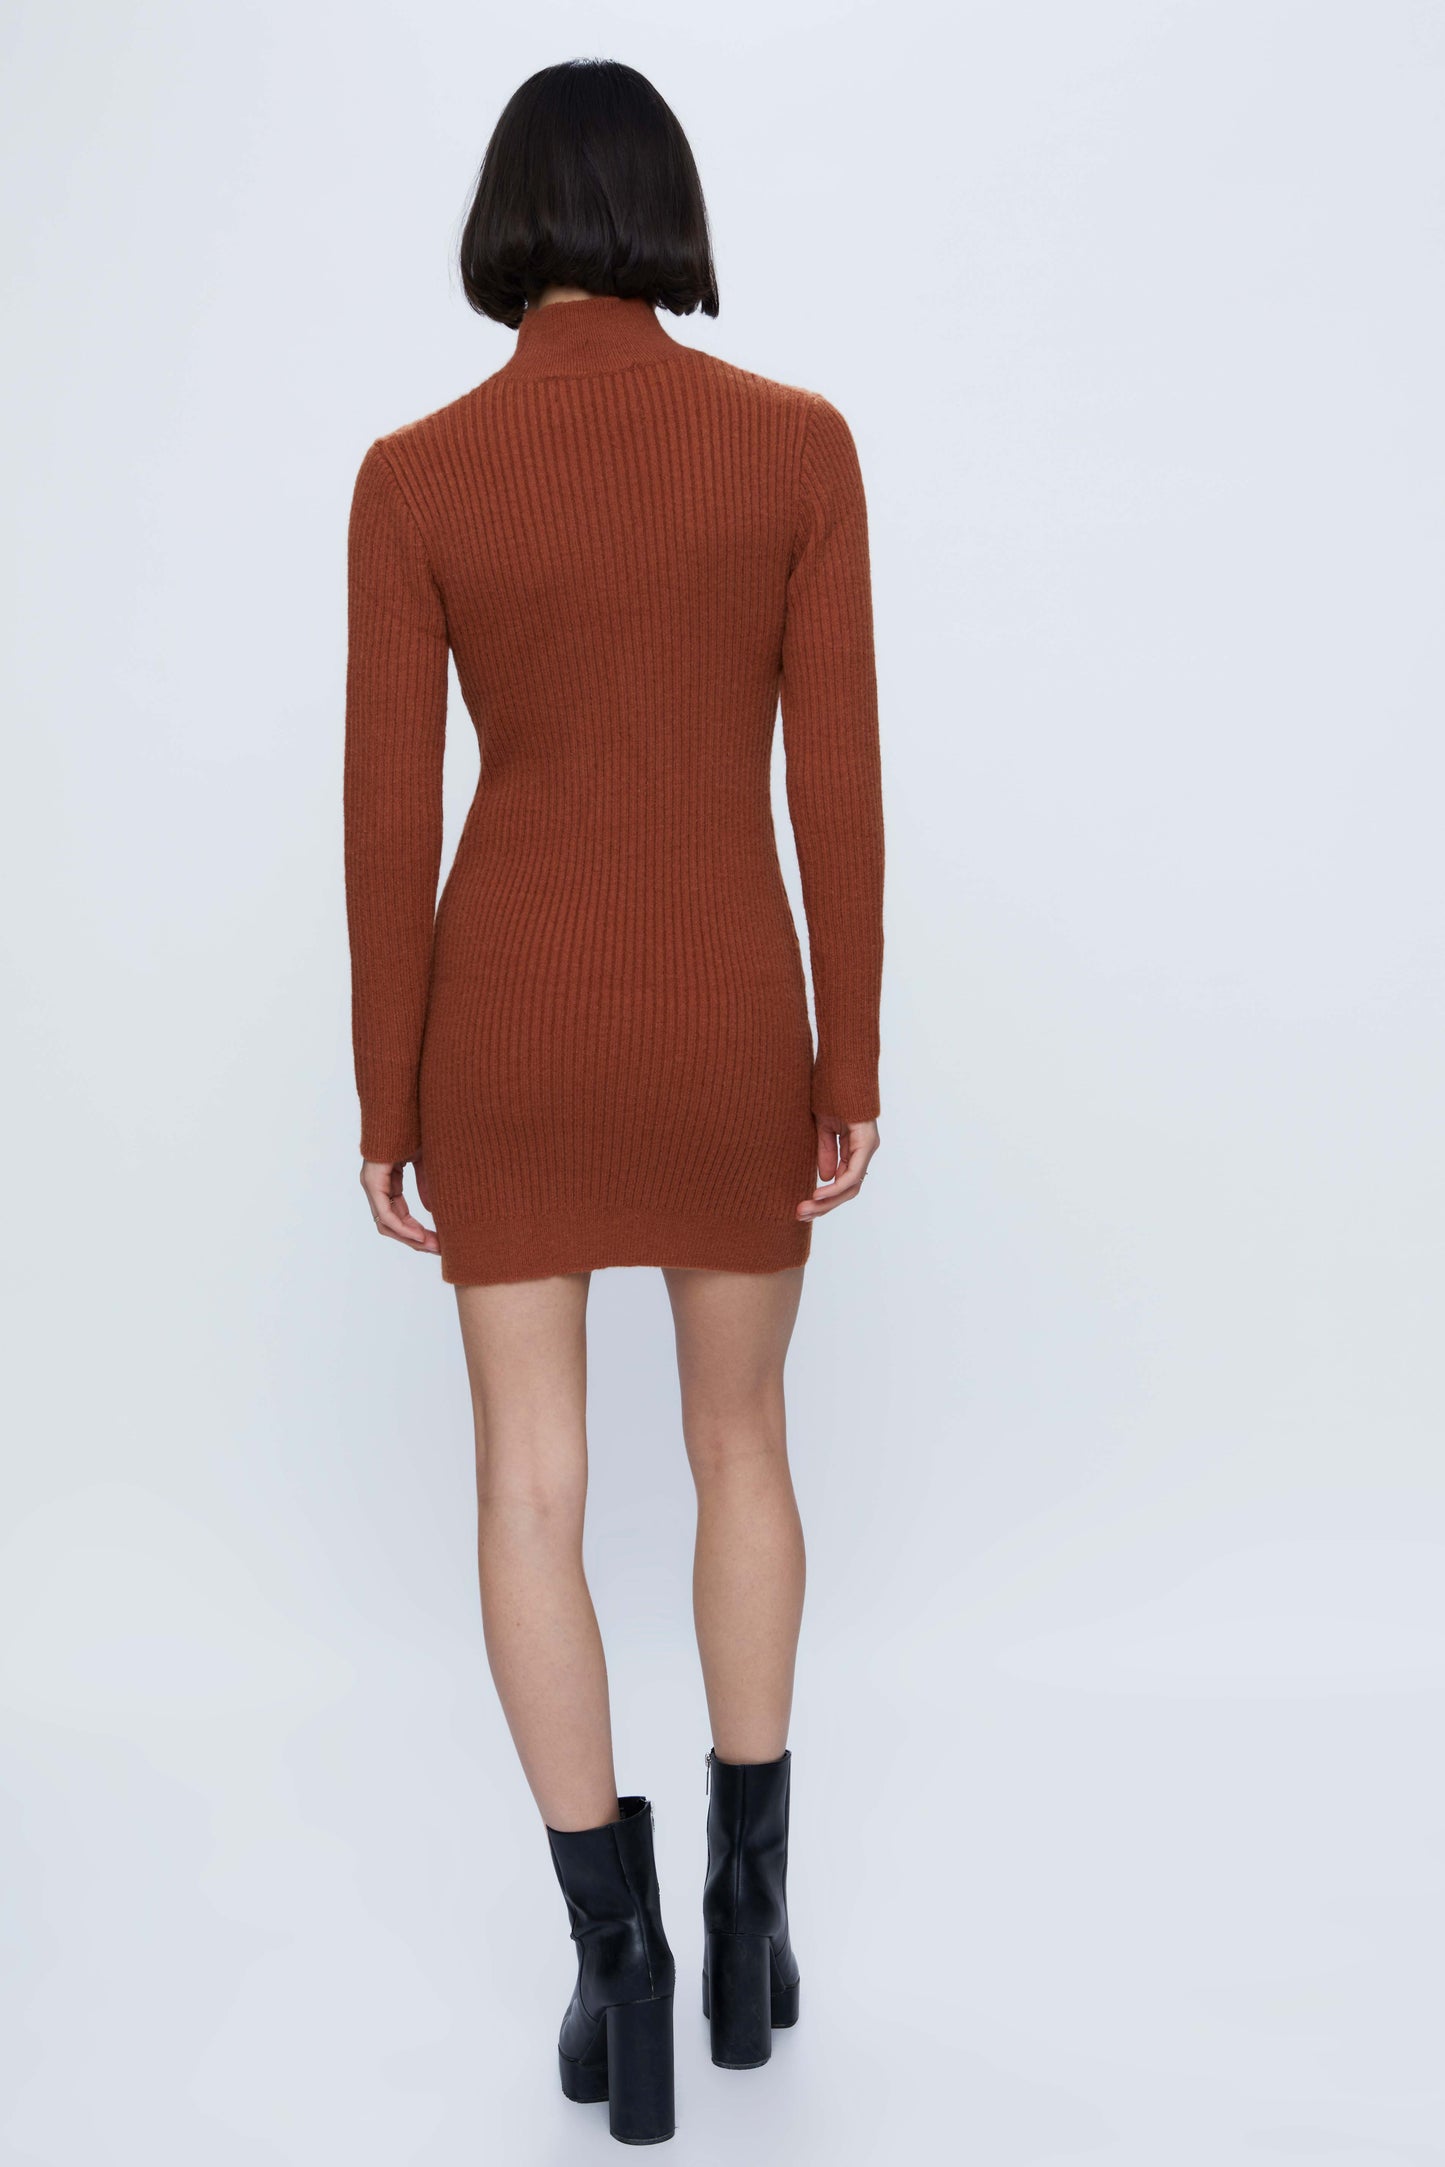 Short brown fitted rib knit dress